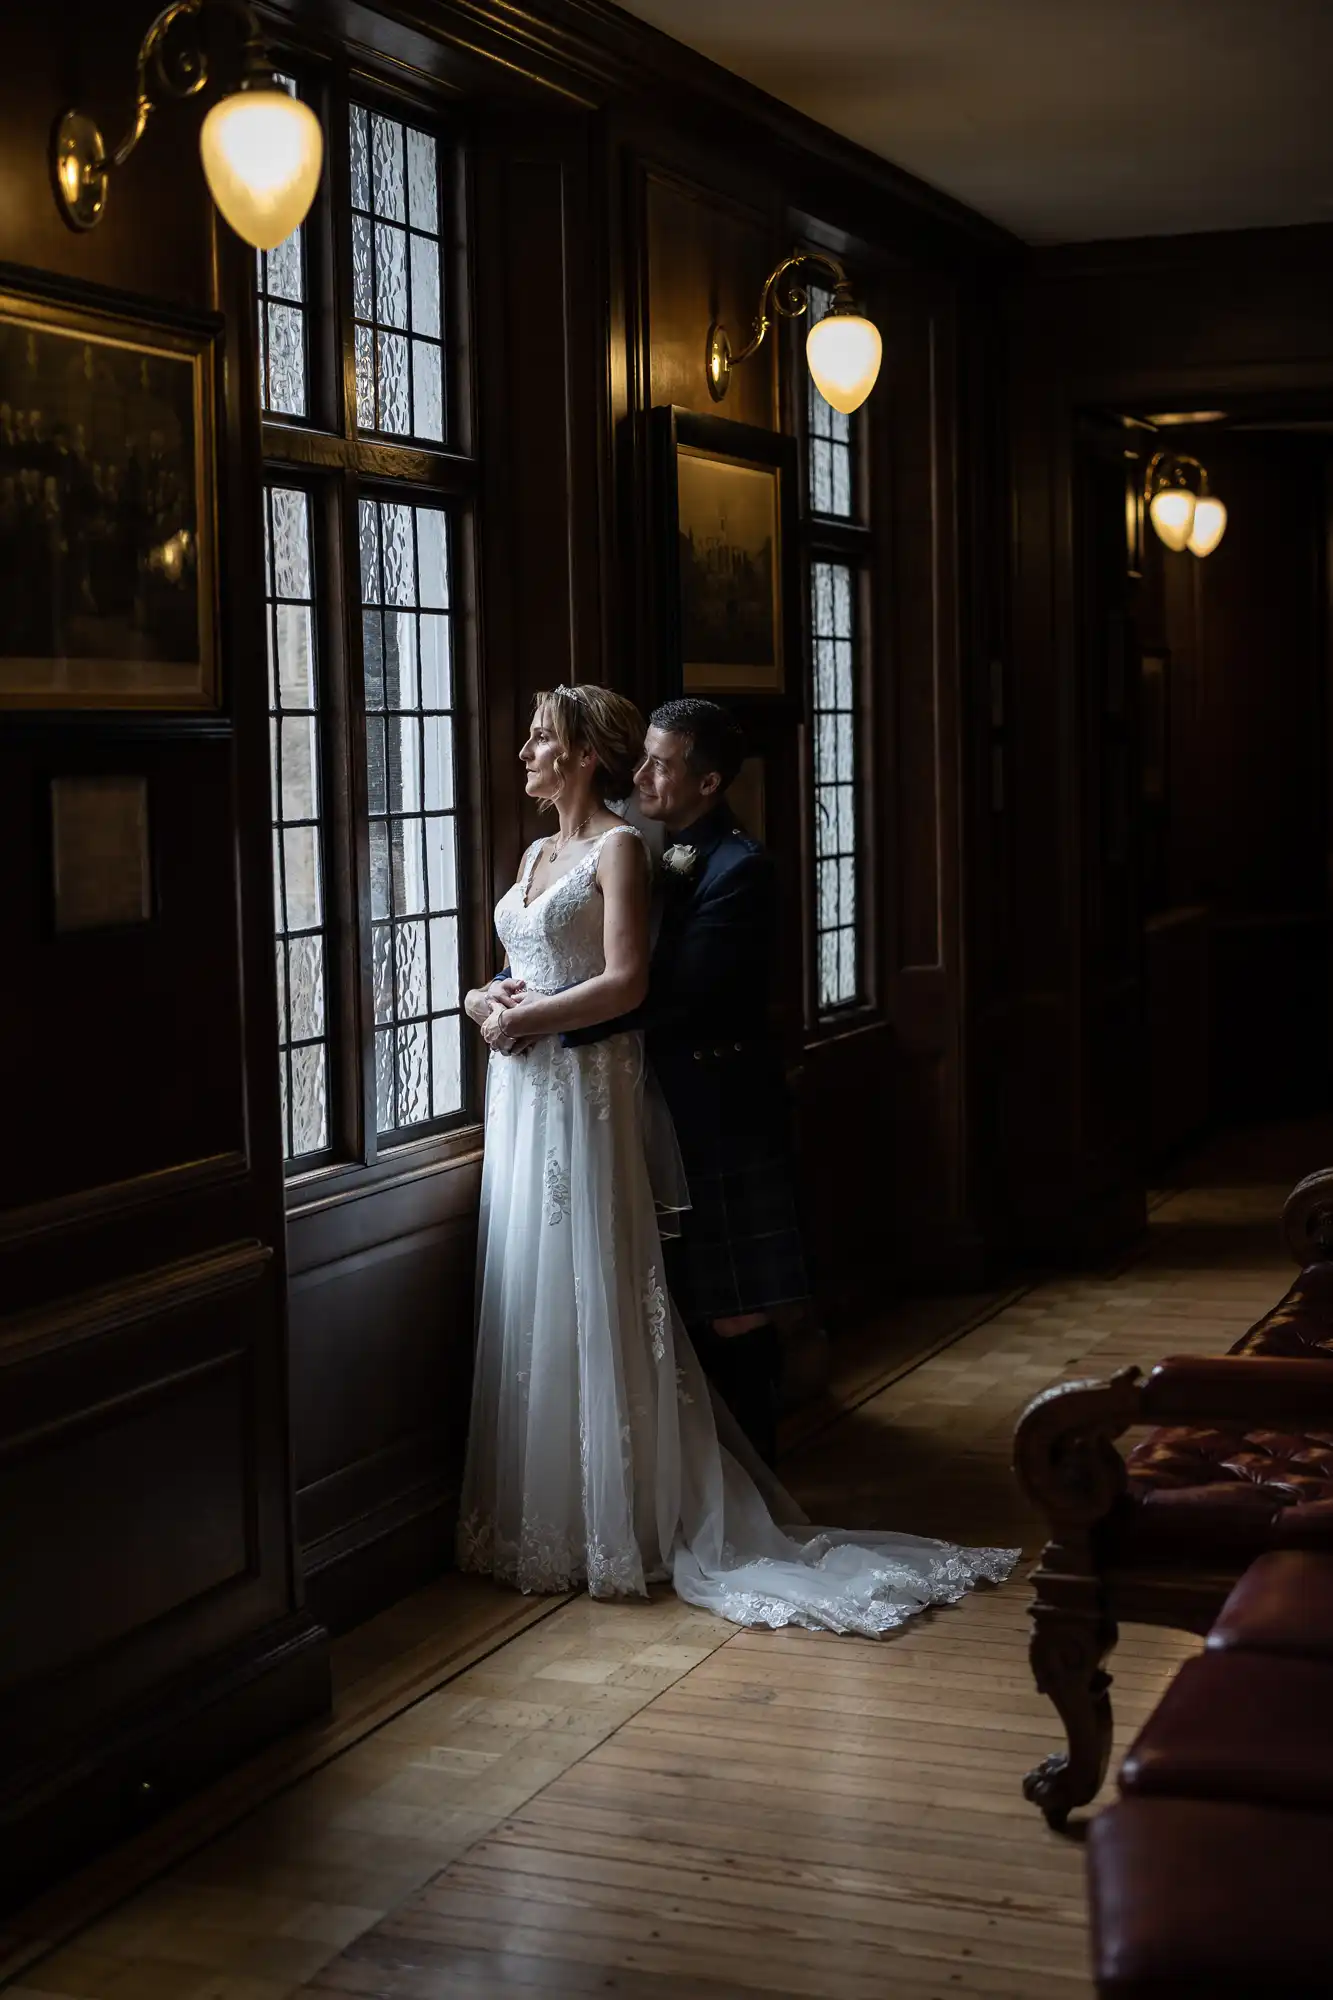 A bride and groom stand together by a window in a dimly lit room with wooden walls and framed pictures.